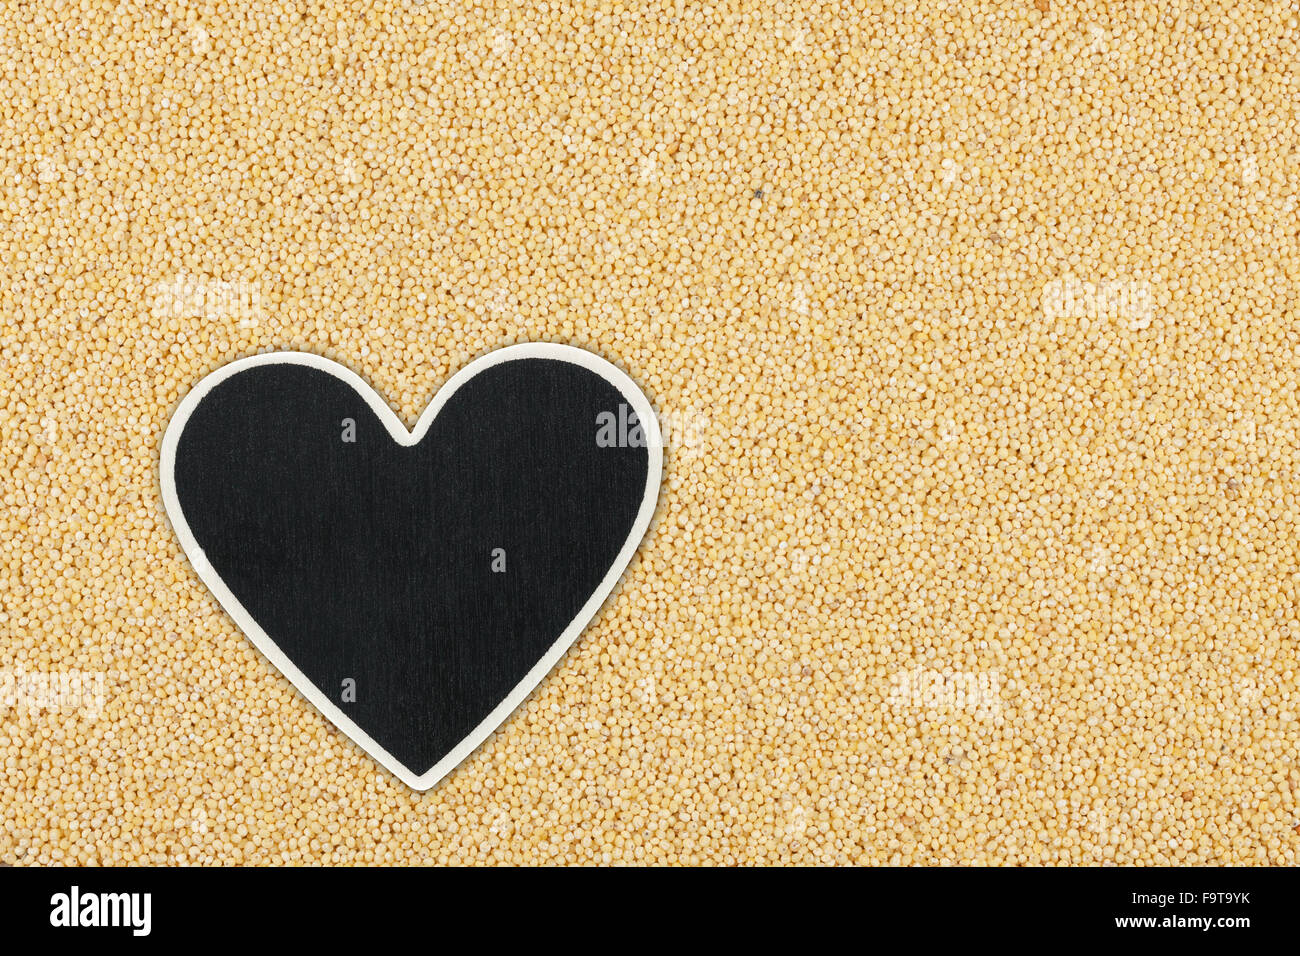 Heart pointer, the price tag lies on millet,  with space for your text Stock Photo